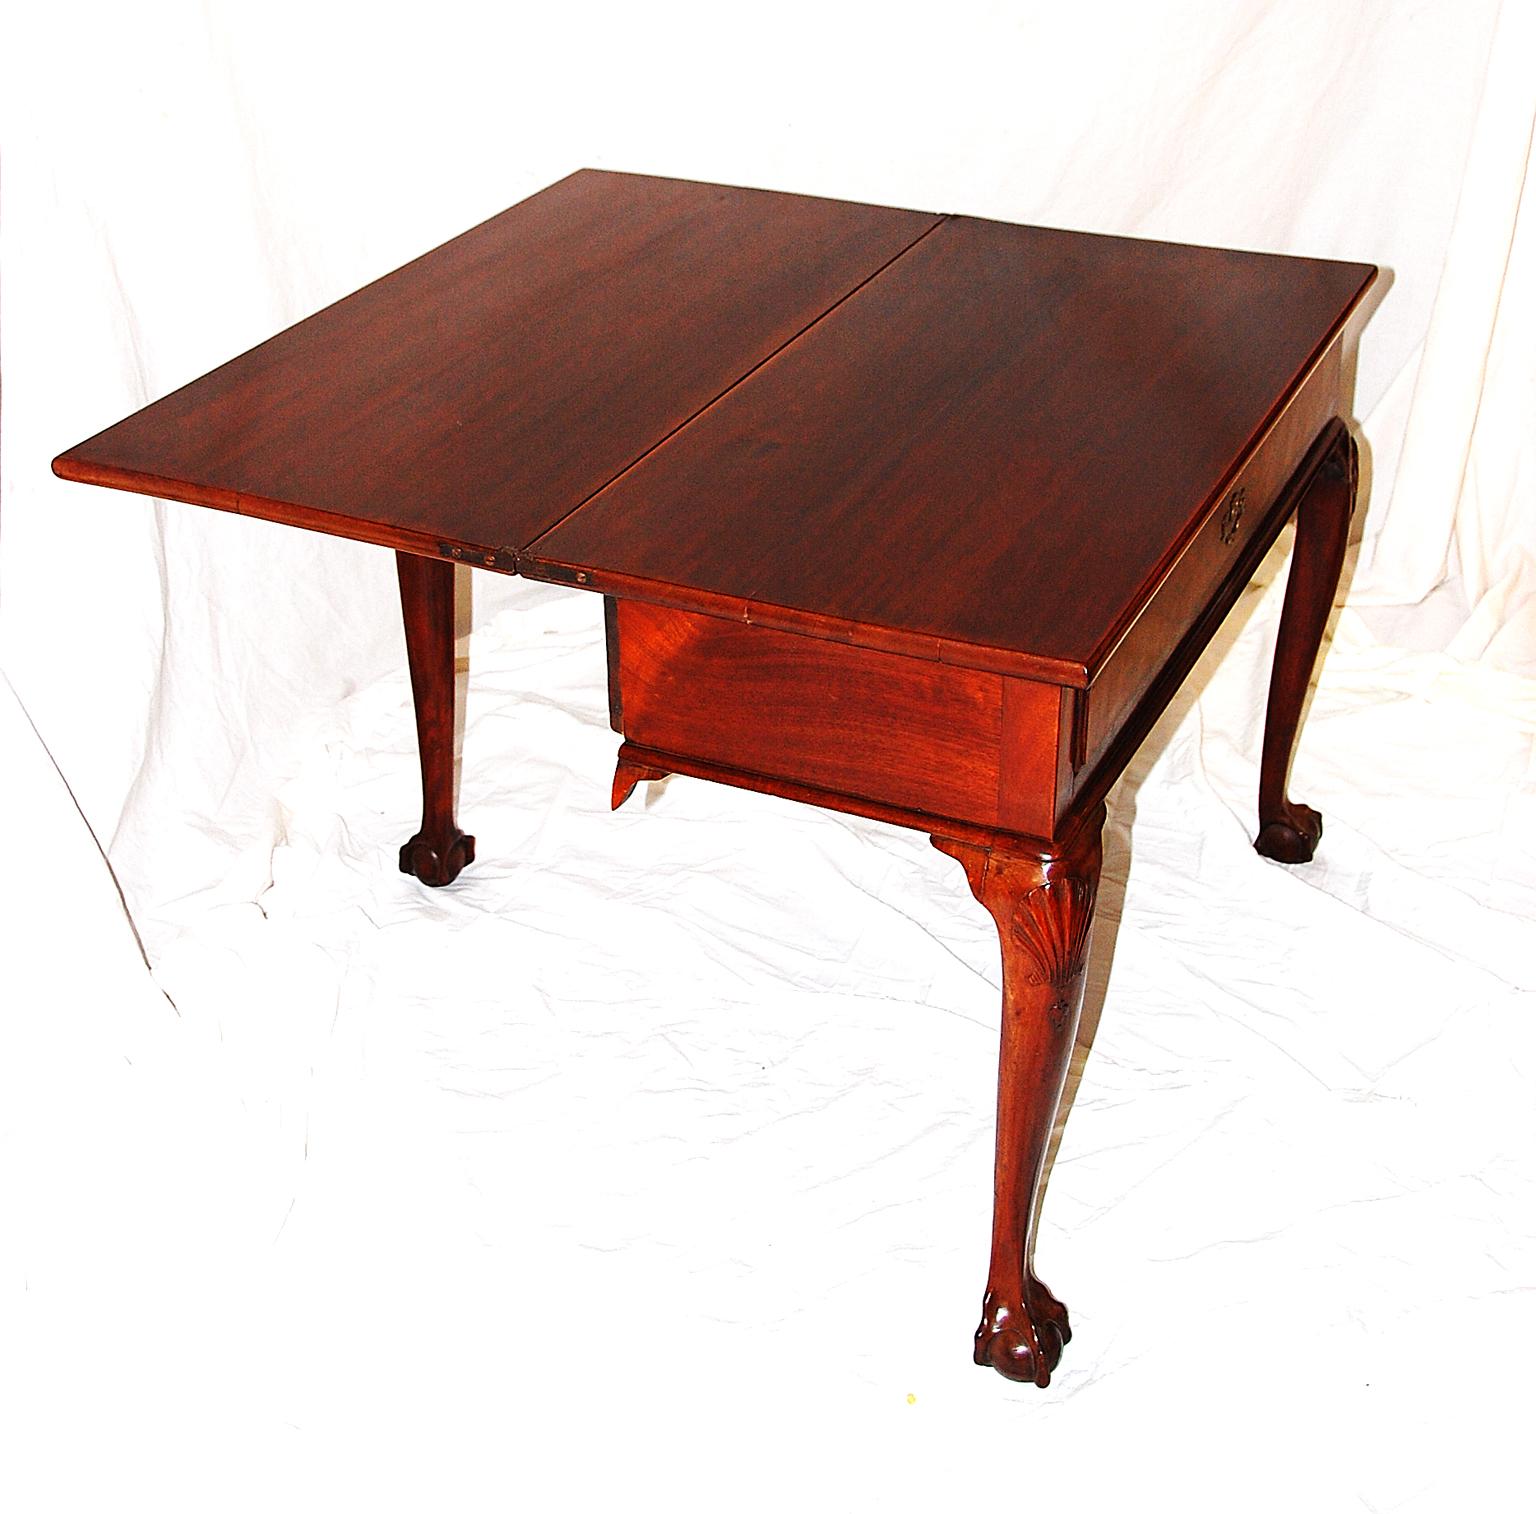 18th Century Irish George II Period Chippendale Mahogany Teatable Carved Cabriole Legs For Sale